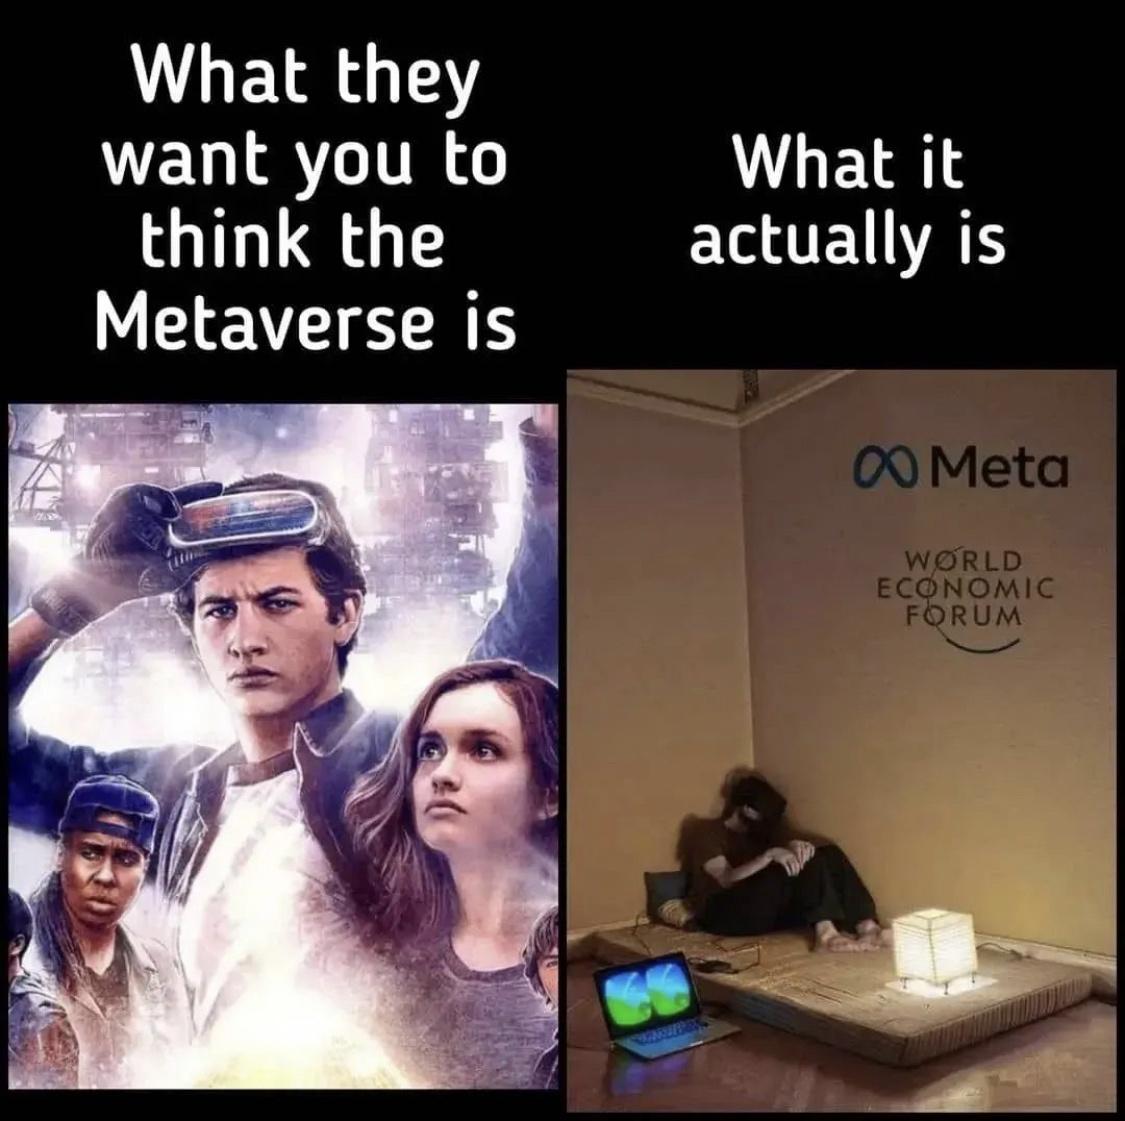 funny memes and pics - metaverse what they want you to think - What they want you to think the Metaverse is What it actually is Meta World Economic Forum